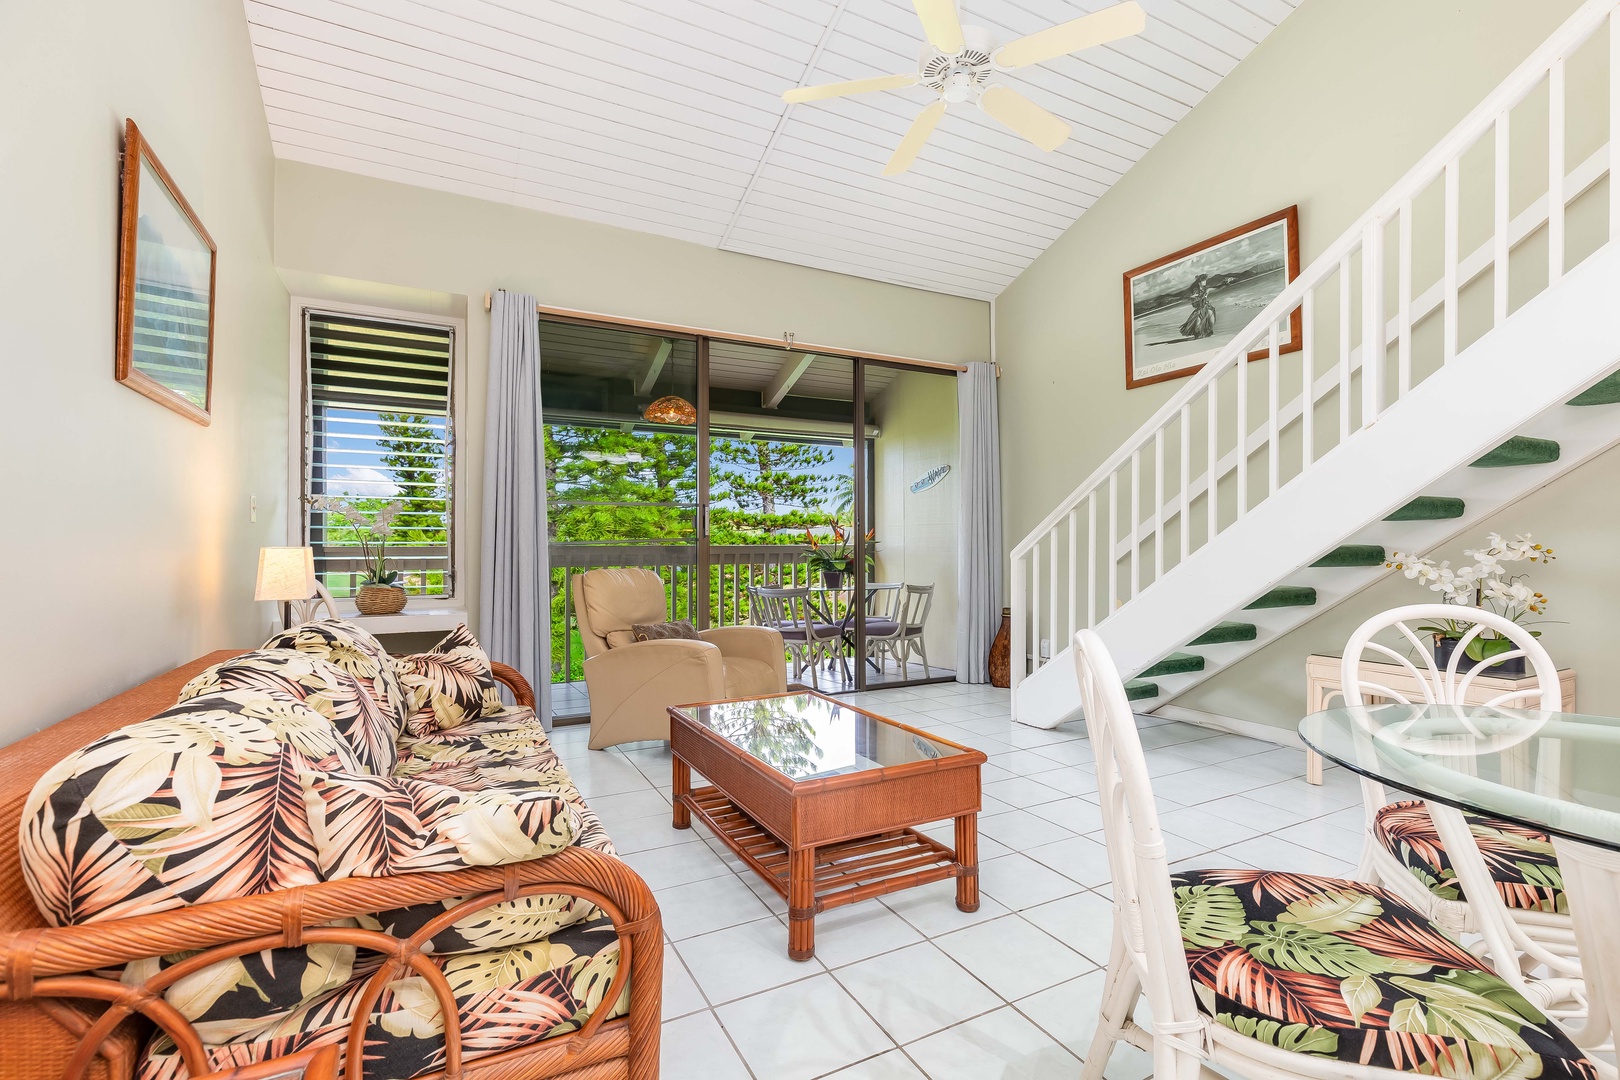 Kahuku Vacation Rentals, Ilima West Kuilima Estates #18 at Turtle Bay - Step into a two-story abode that boasts a fluid open floor plan, inviting connection and ease.